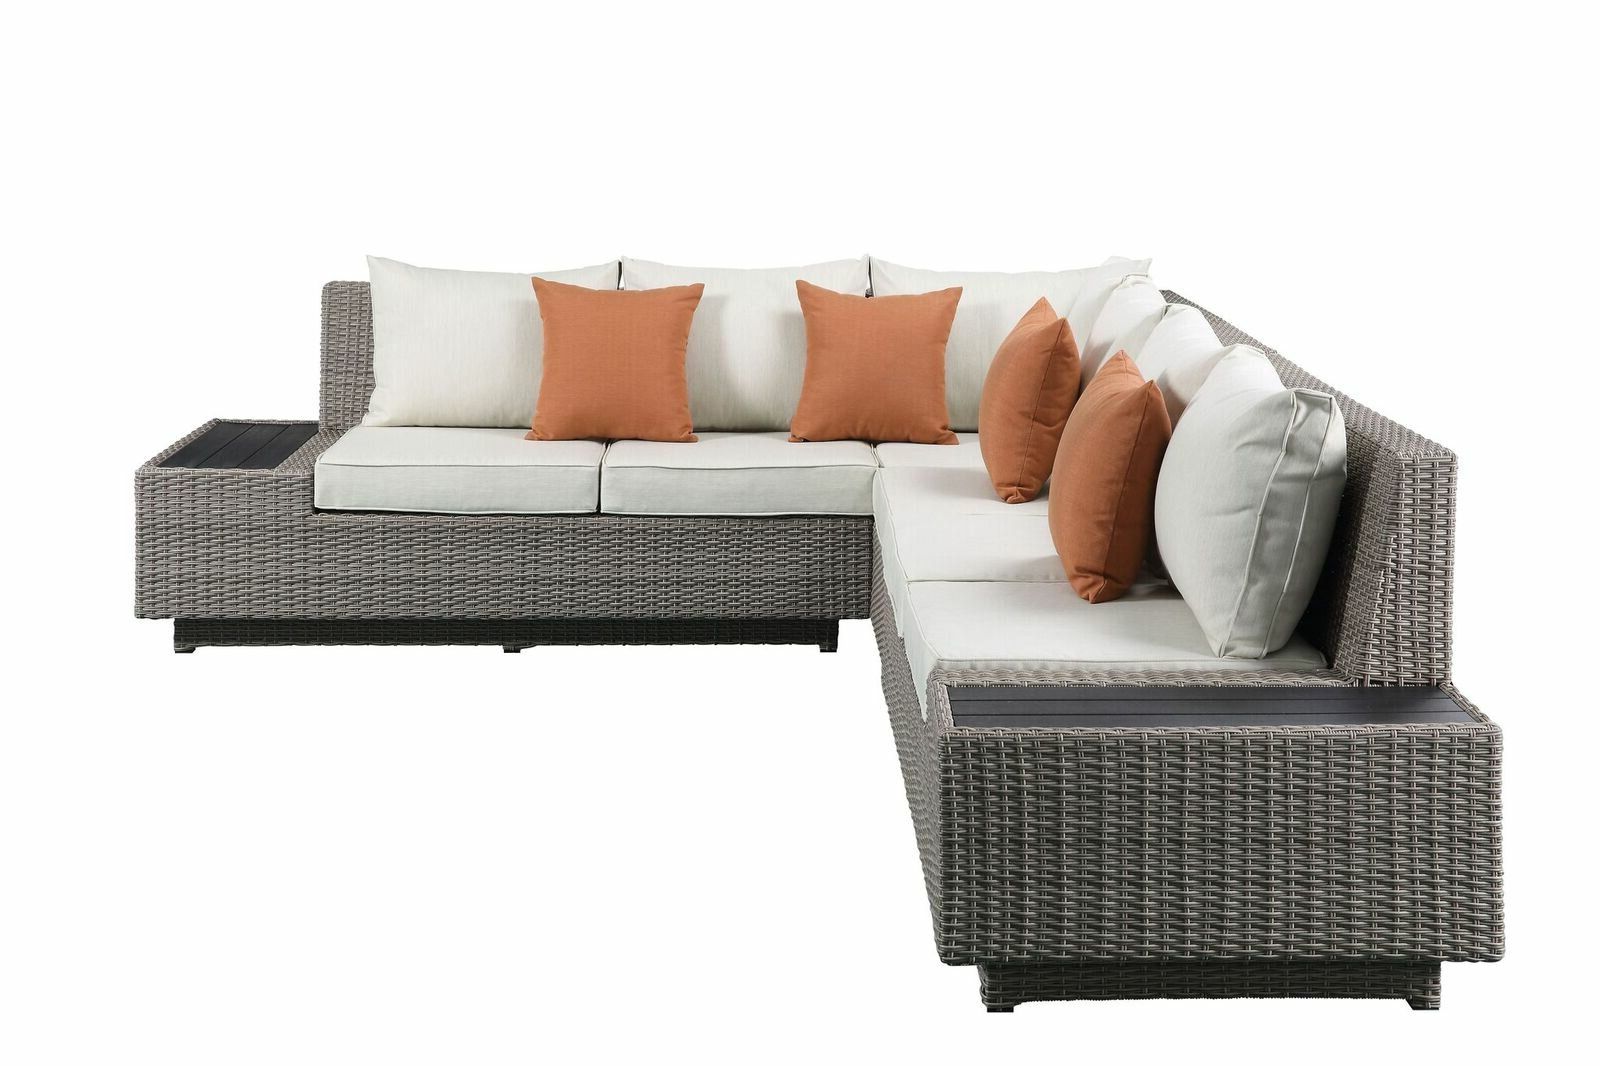 Favorite Platt Patio Sectional With Cushions Throughout Lobdell Patio Sofas With Cushions (View 14 of 25)